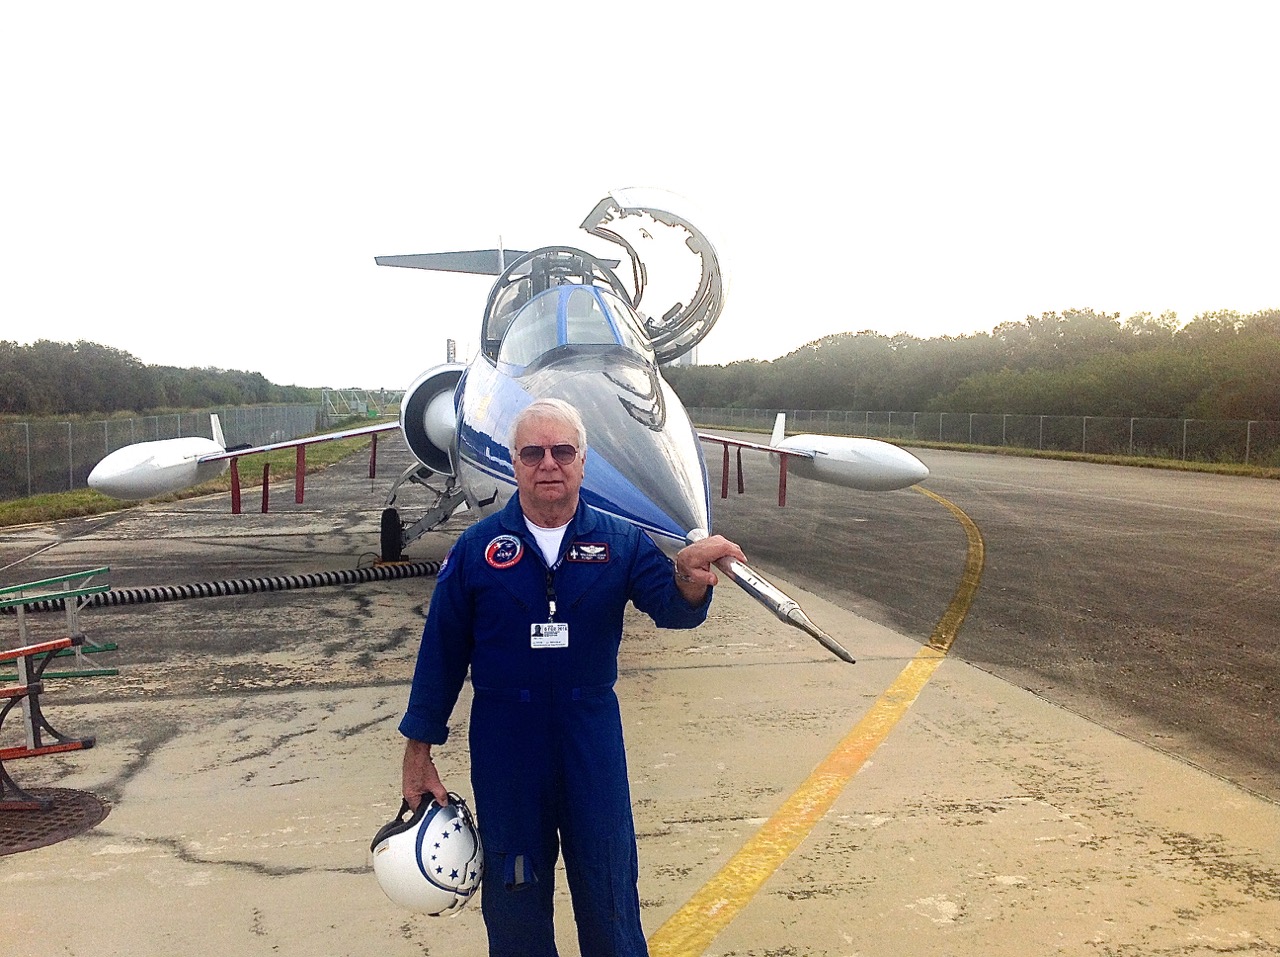 Wolfgang Czaia celebrated his 50th year of flying F-104s November 2014, which is an incredible feat by any standard.